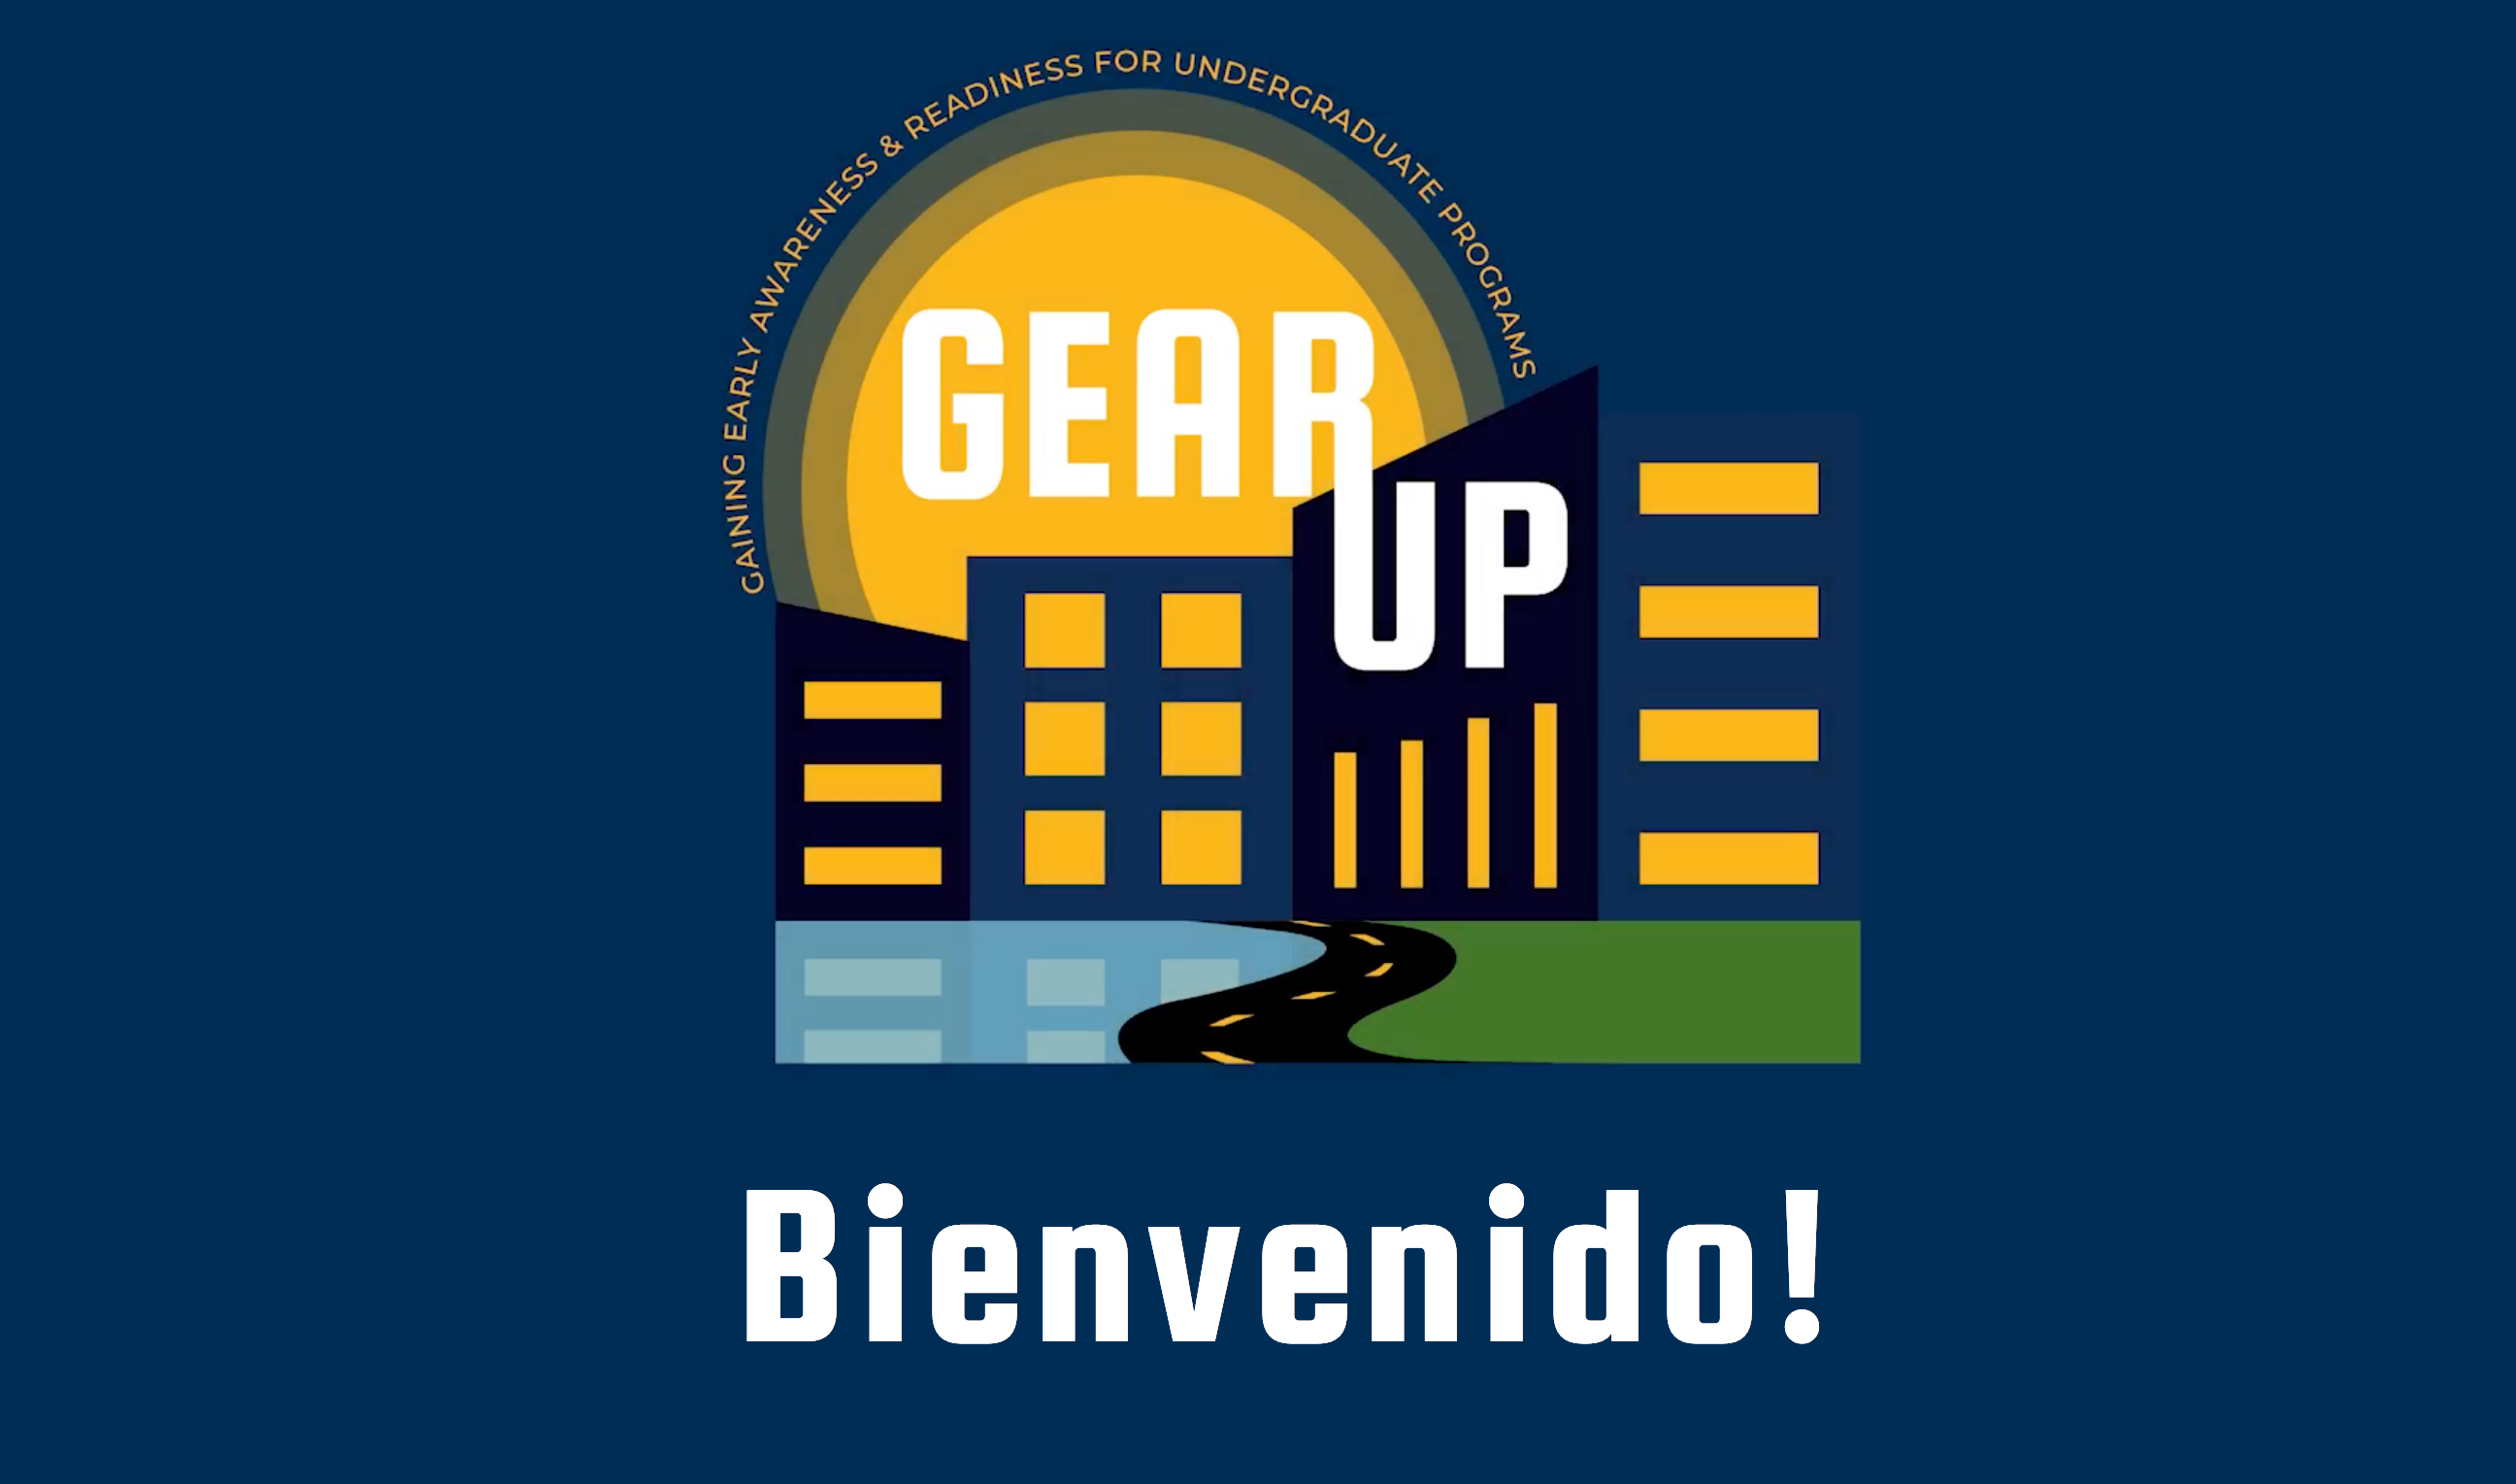 GEAR UP - Center for Educational Outreach - University of Michigan